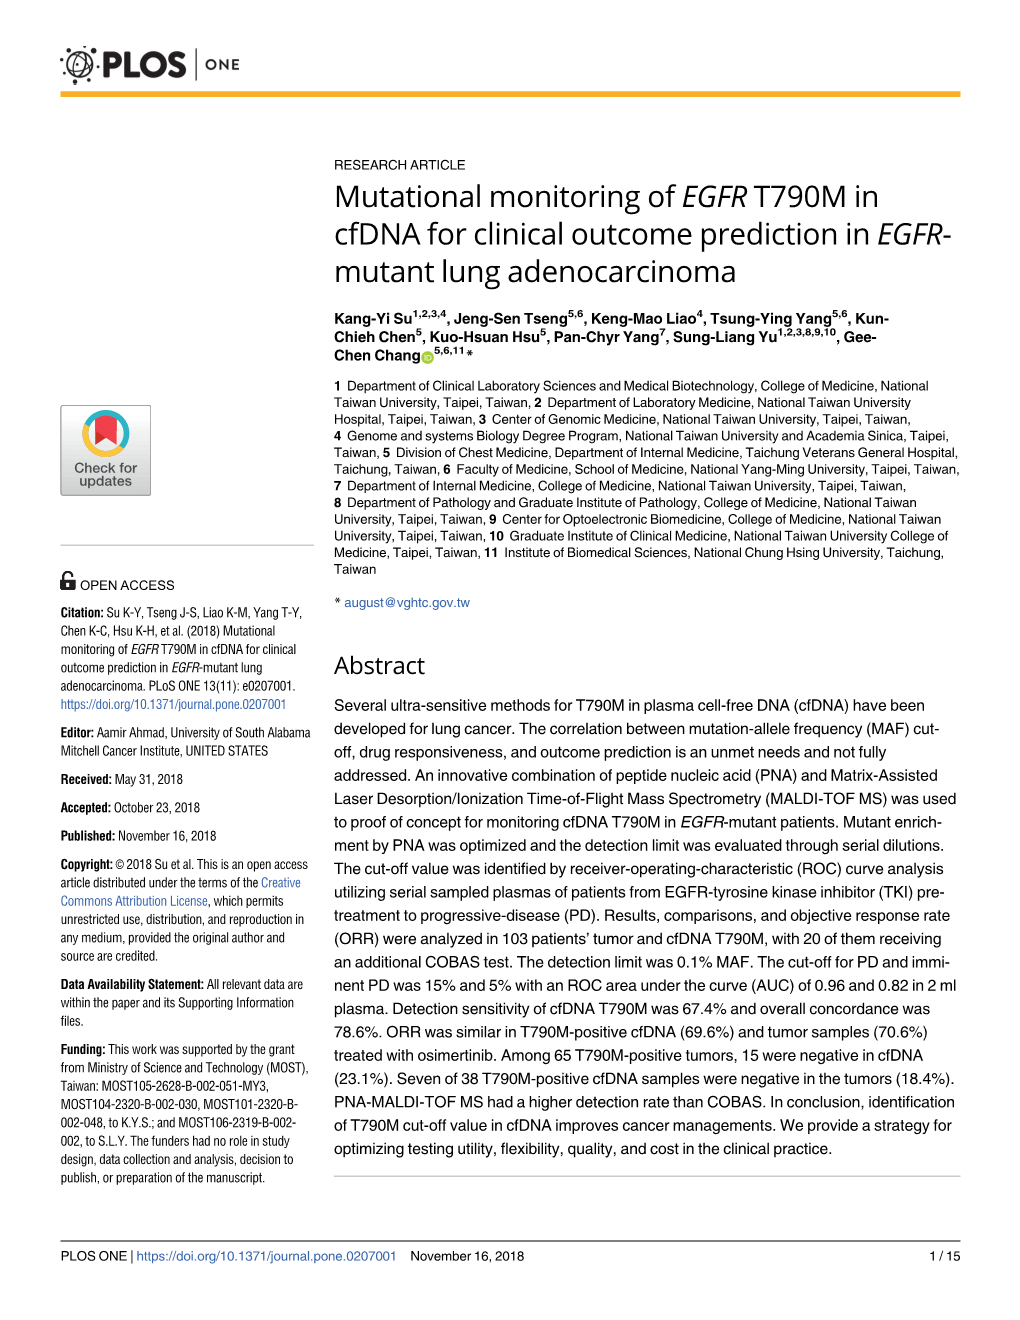 Mutational Monitoring of EGFR T790M in Cfdna for Clinical Outcome Prediction in EGFR- Mutant Lung Adenocarcinoma